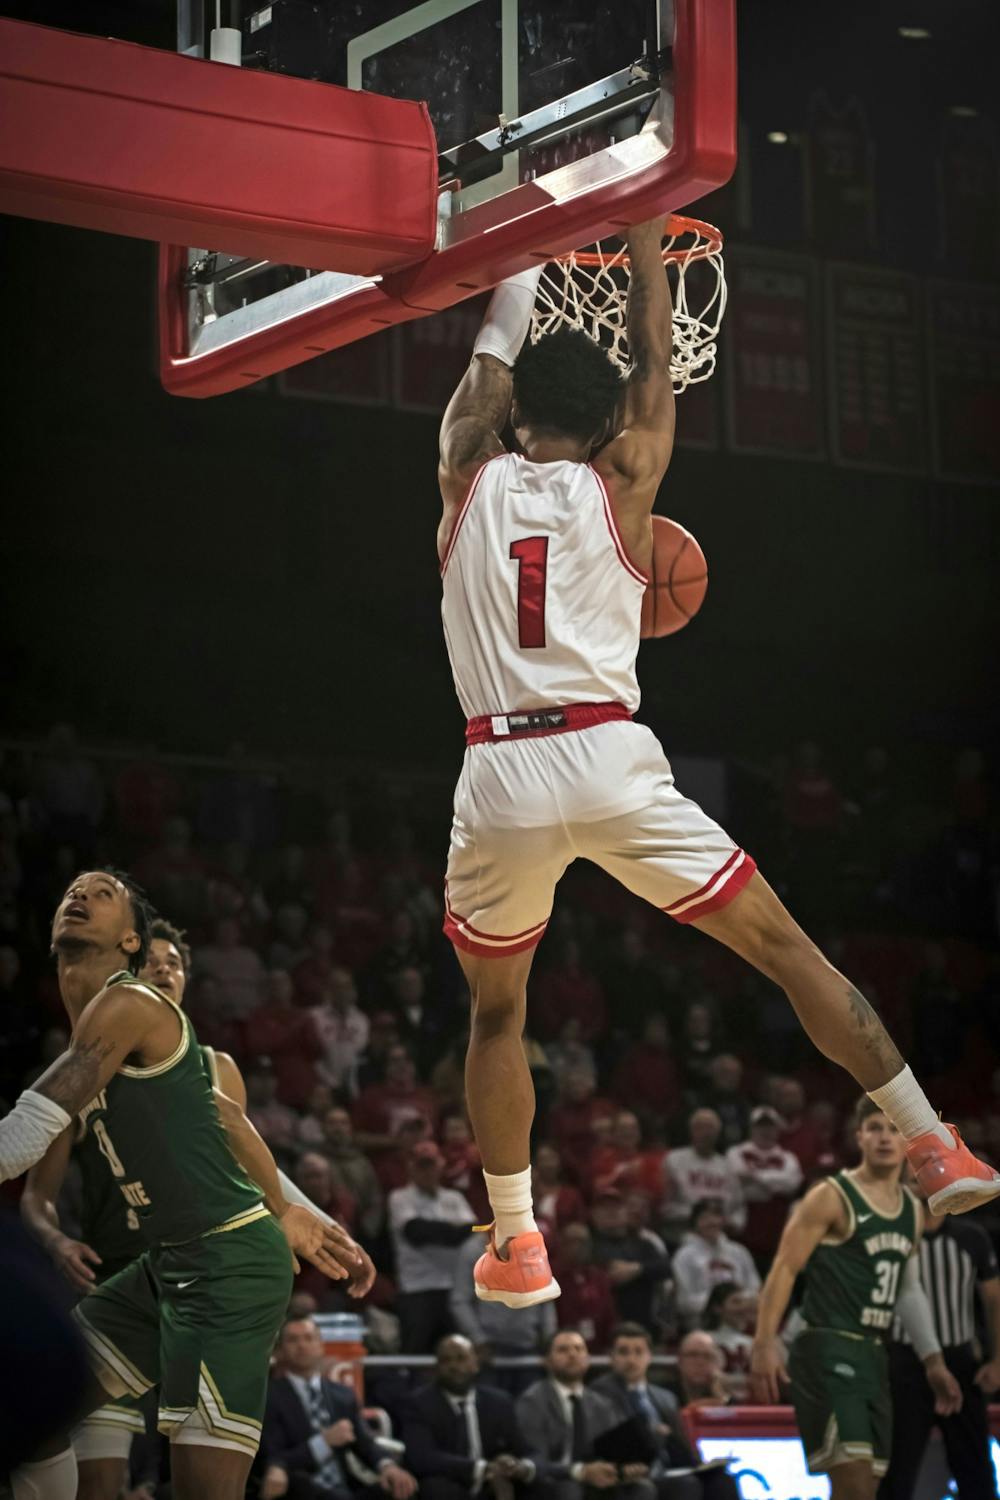 Junior guard Nike Sibande dunks an alley-oop pass for Miami&#x27;s first points of the 2019-2020 season on Nov. 9 at Millett Hall. Sibande, who flirted with the National Basketball Association in the offseason, scored 24 points in the RedHawks&#x27; 88-81 loss to Wright State.